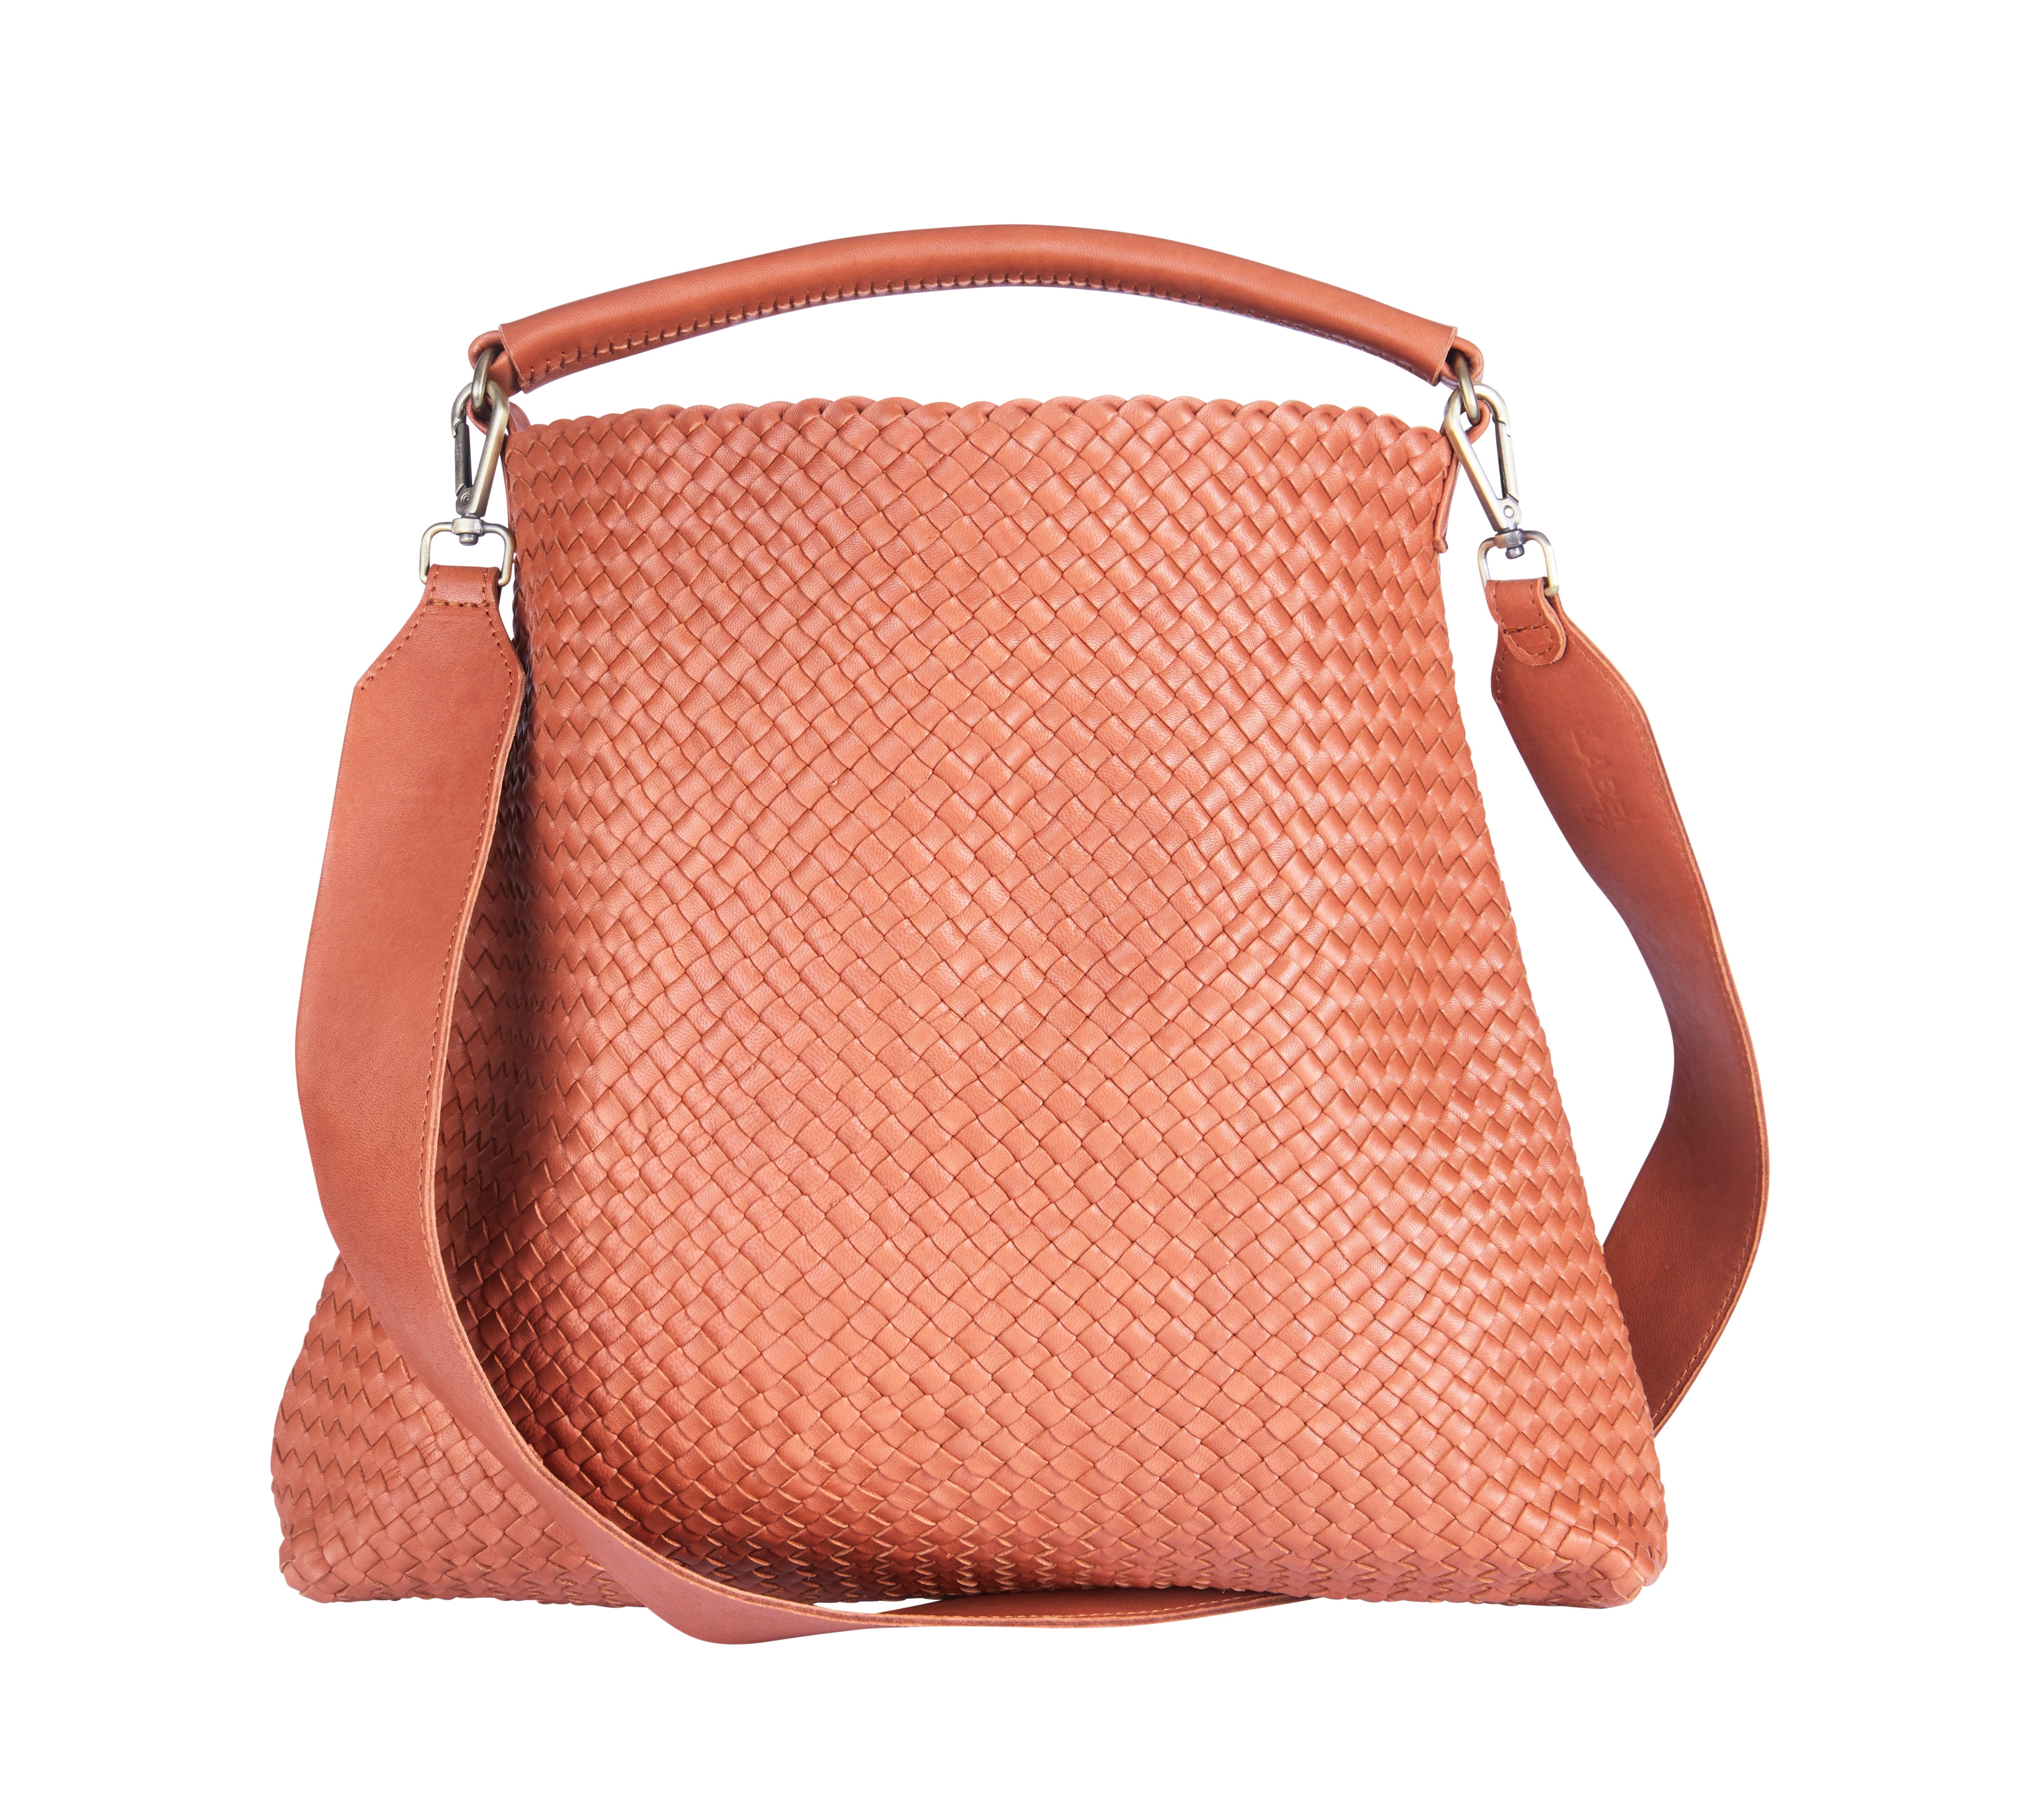 LABEL17 presents the Handbag Tresse Lou in Brick. Hand-Braided Lamb-Nappaleather, crafted in Morocco